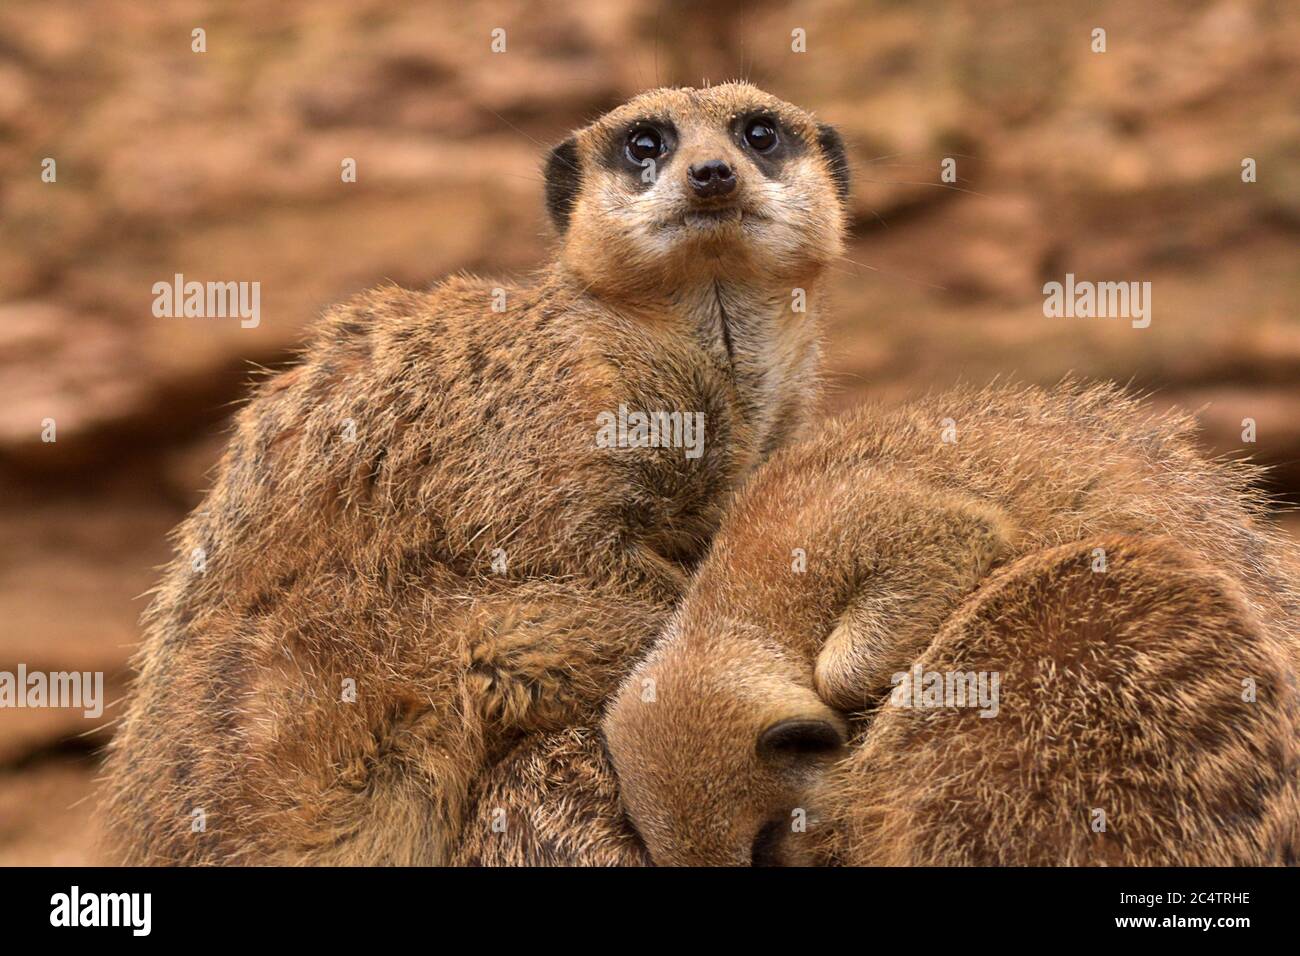 An alert Meerkat watches for threats as the rest of the pack sleeps. Chester Zoo (UK) provides the desert-like backdrop of its native African habitat. Stock Photo